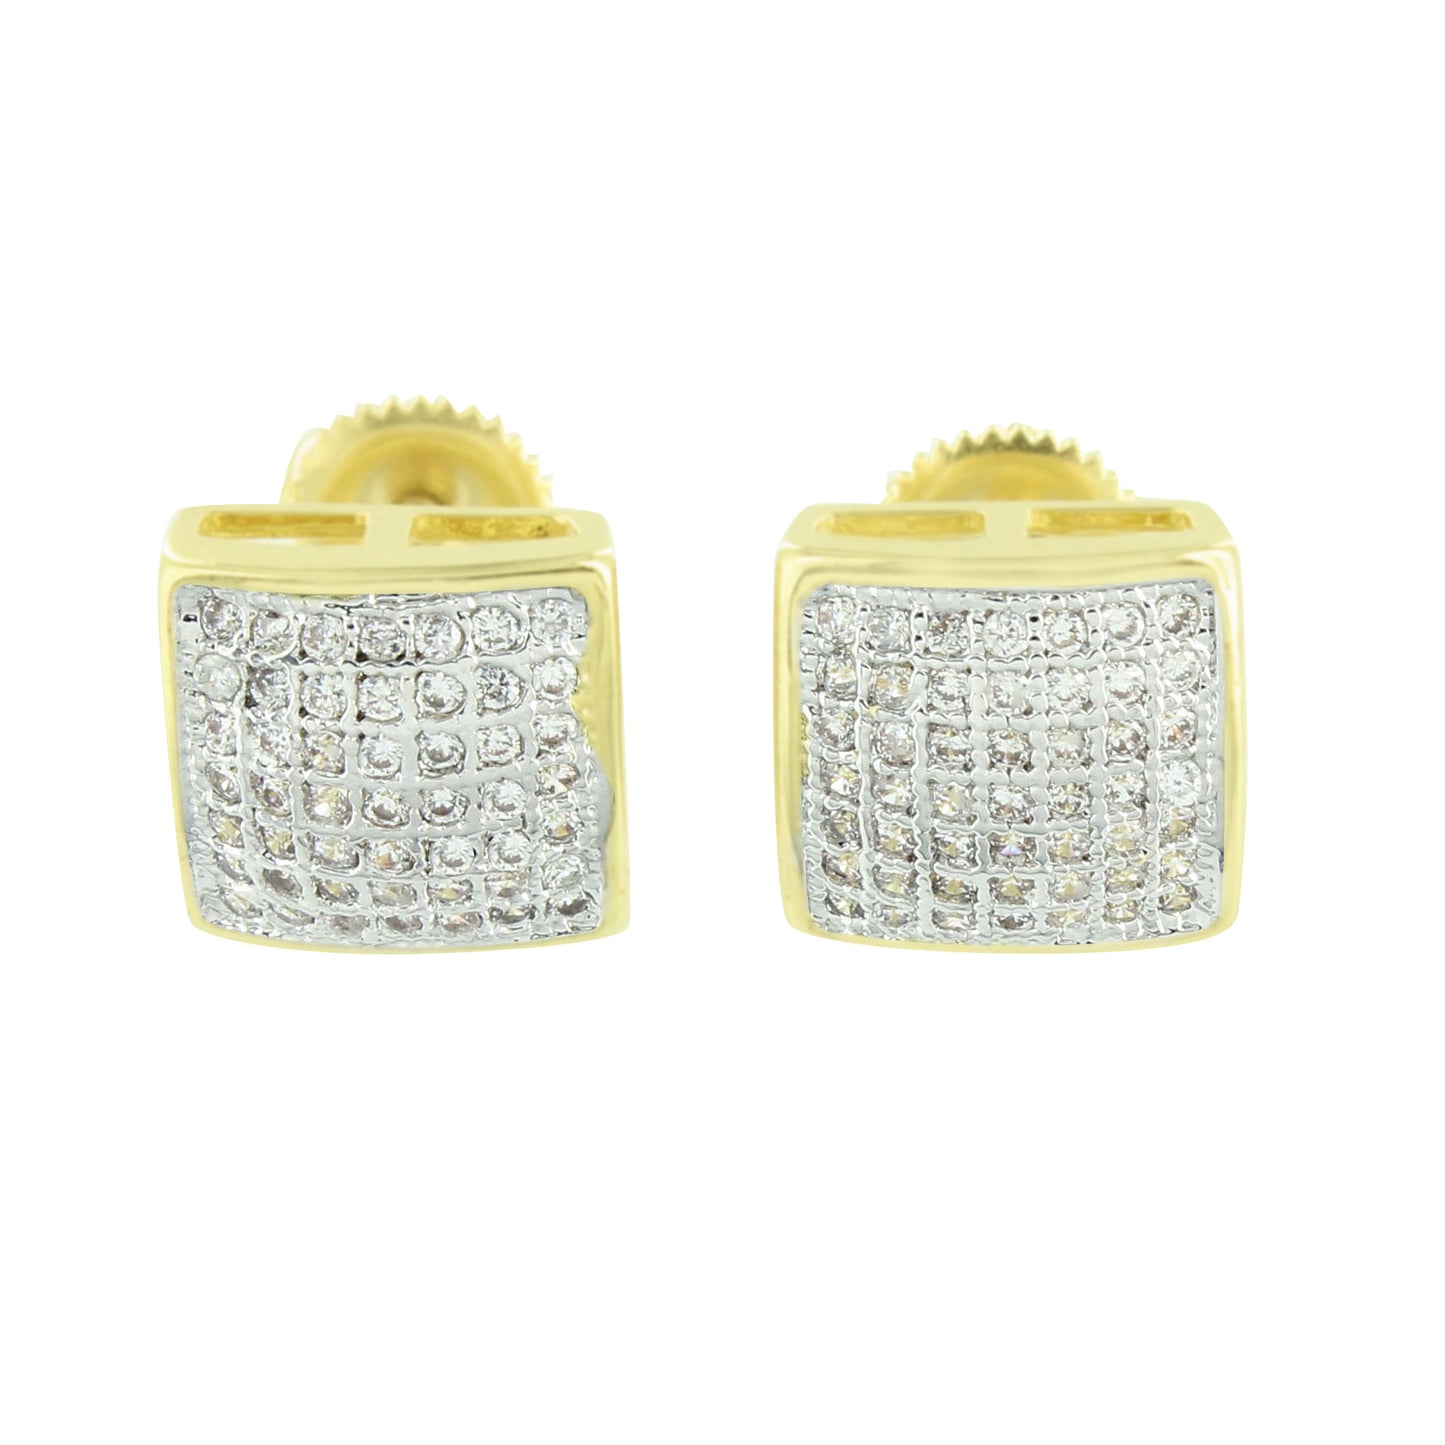 Square Shape Earrings Yellow Gold Finish Lab Created CZ Pave Set Screw Back